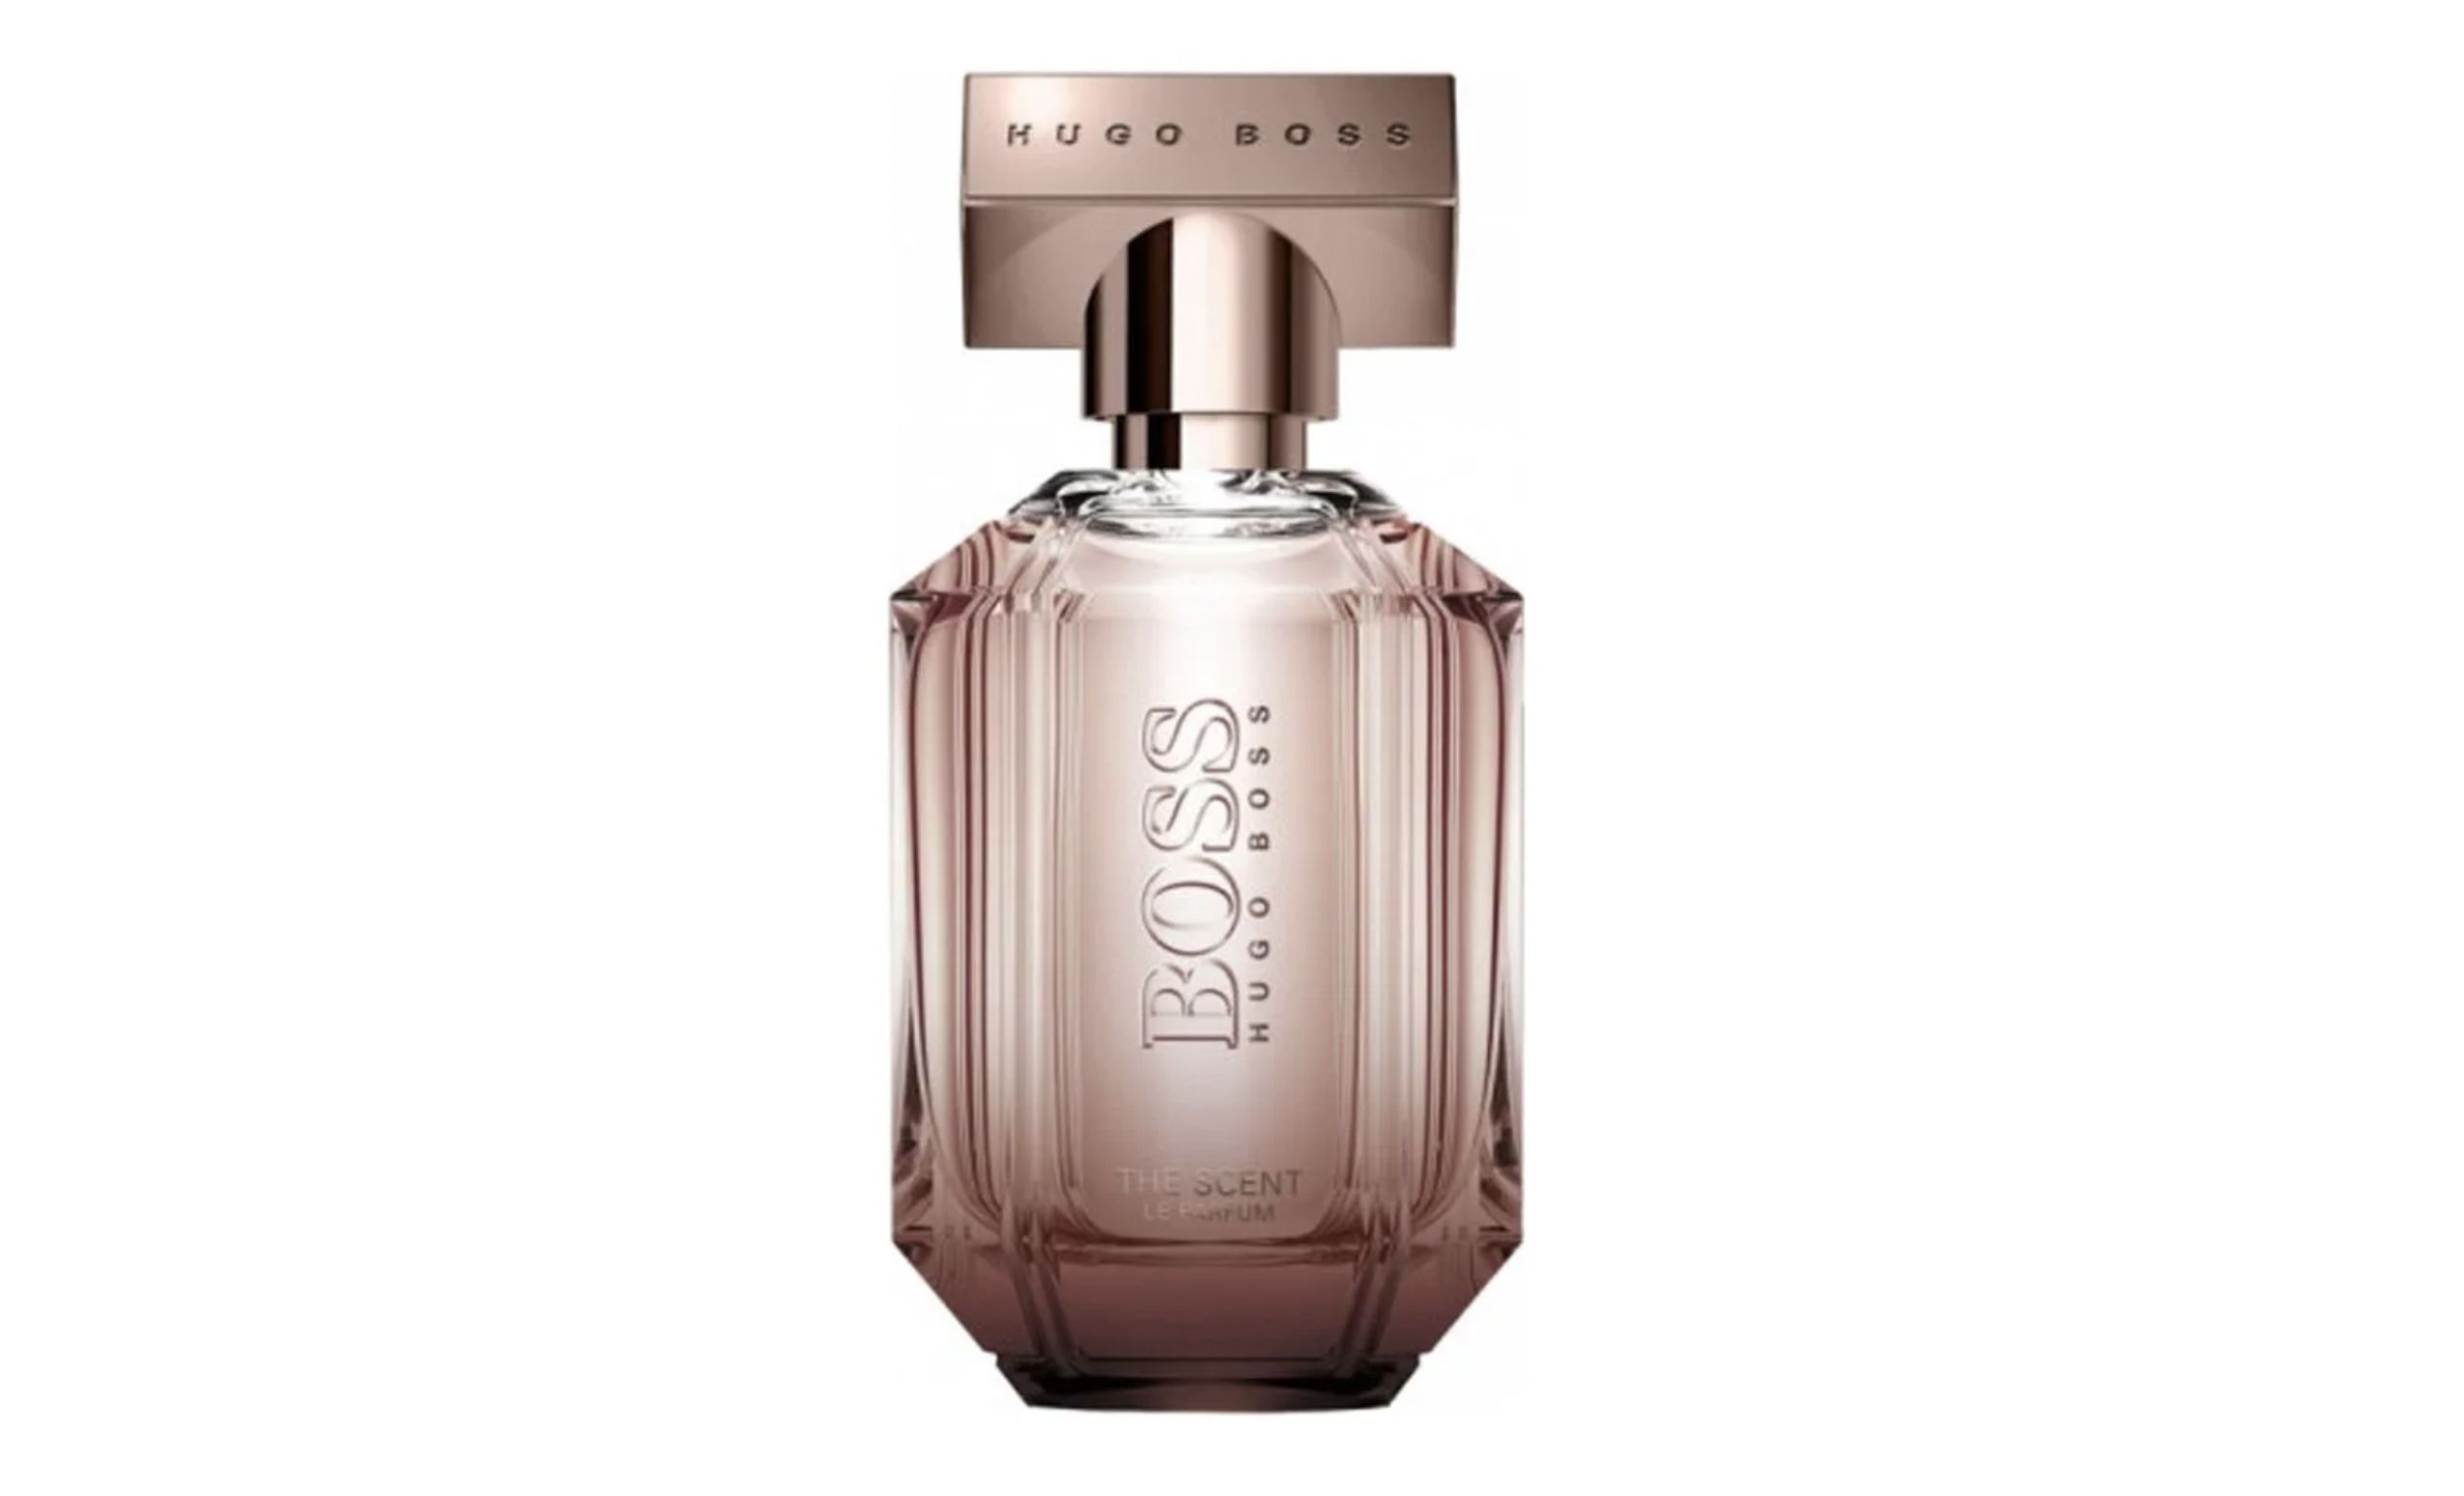 Hugo boss the scent женский. The Scent Hugo Boss женские. Boss the Scent for her 100 ml. Boss Perfume Hugo Boss the Scent. Hugo Boss Boss the Scent EDT 100мл.